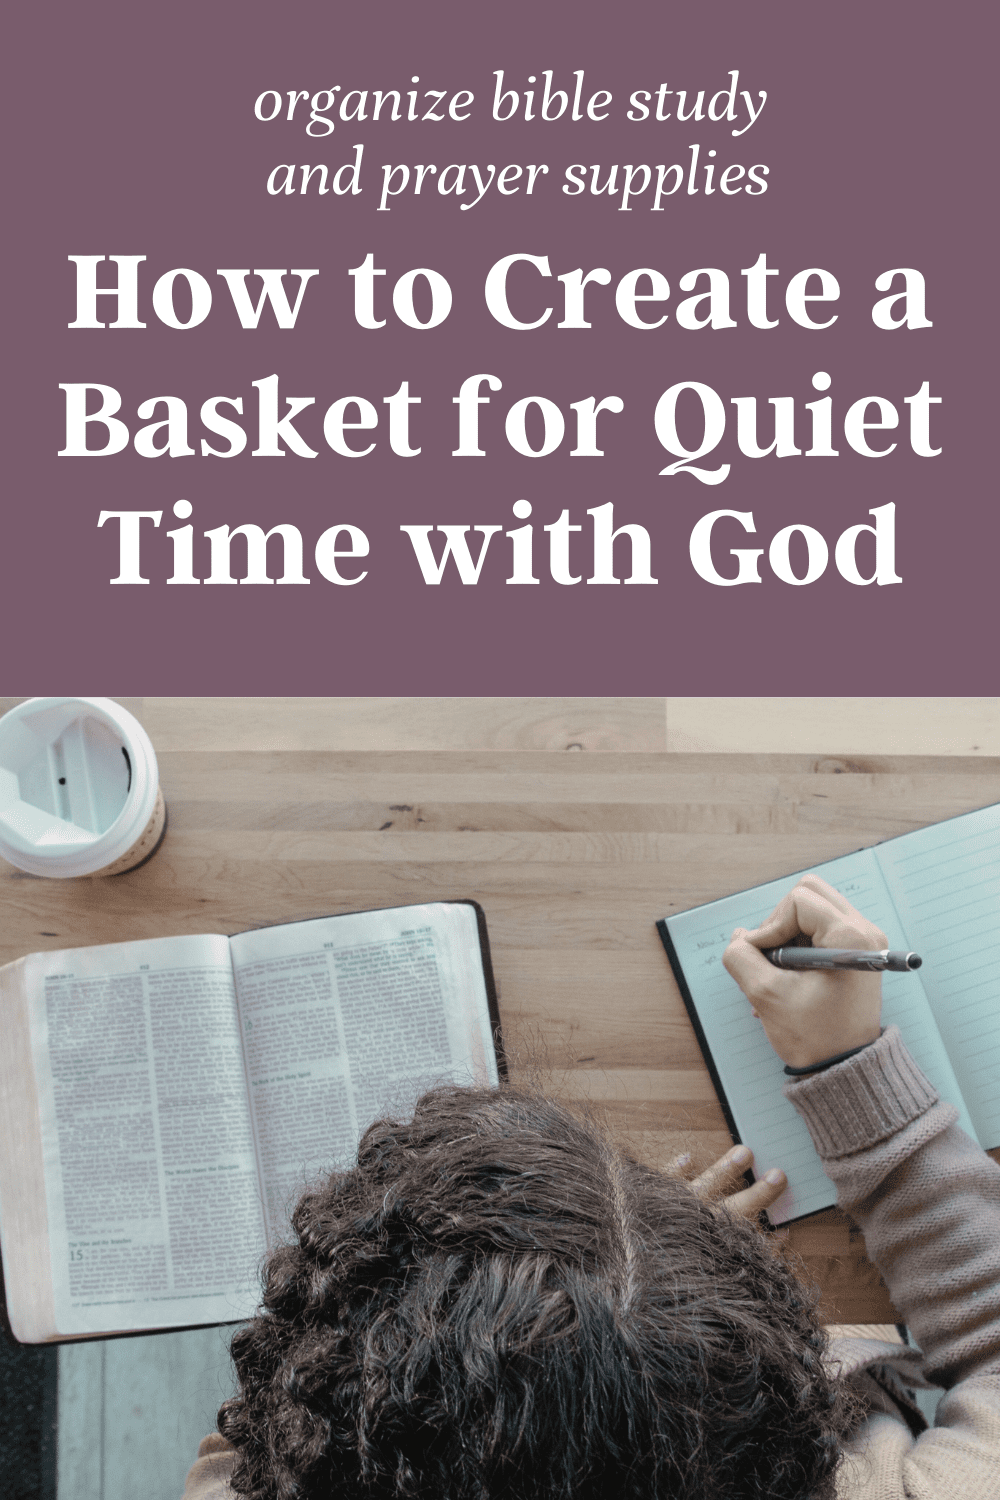 Quiet Time Basket: Stop Wasting Time Looking for Your Supplies